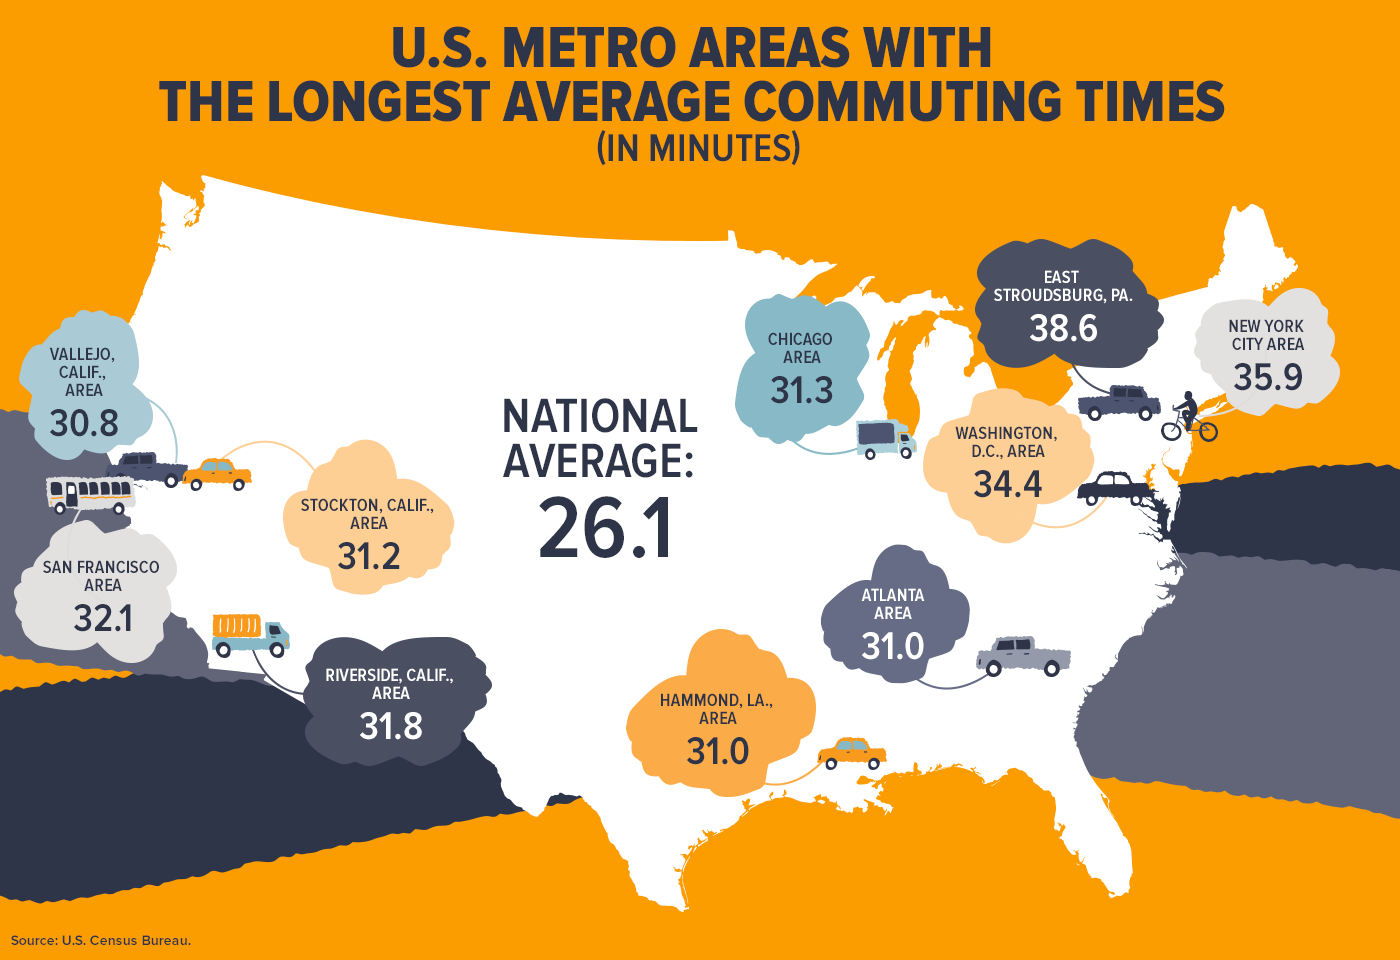 U.S. Metro Areas with the Longest Average Commuting Times (in Minutes)